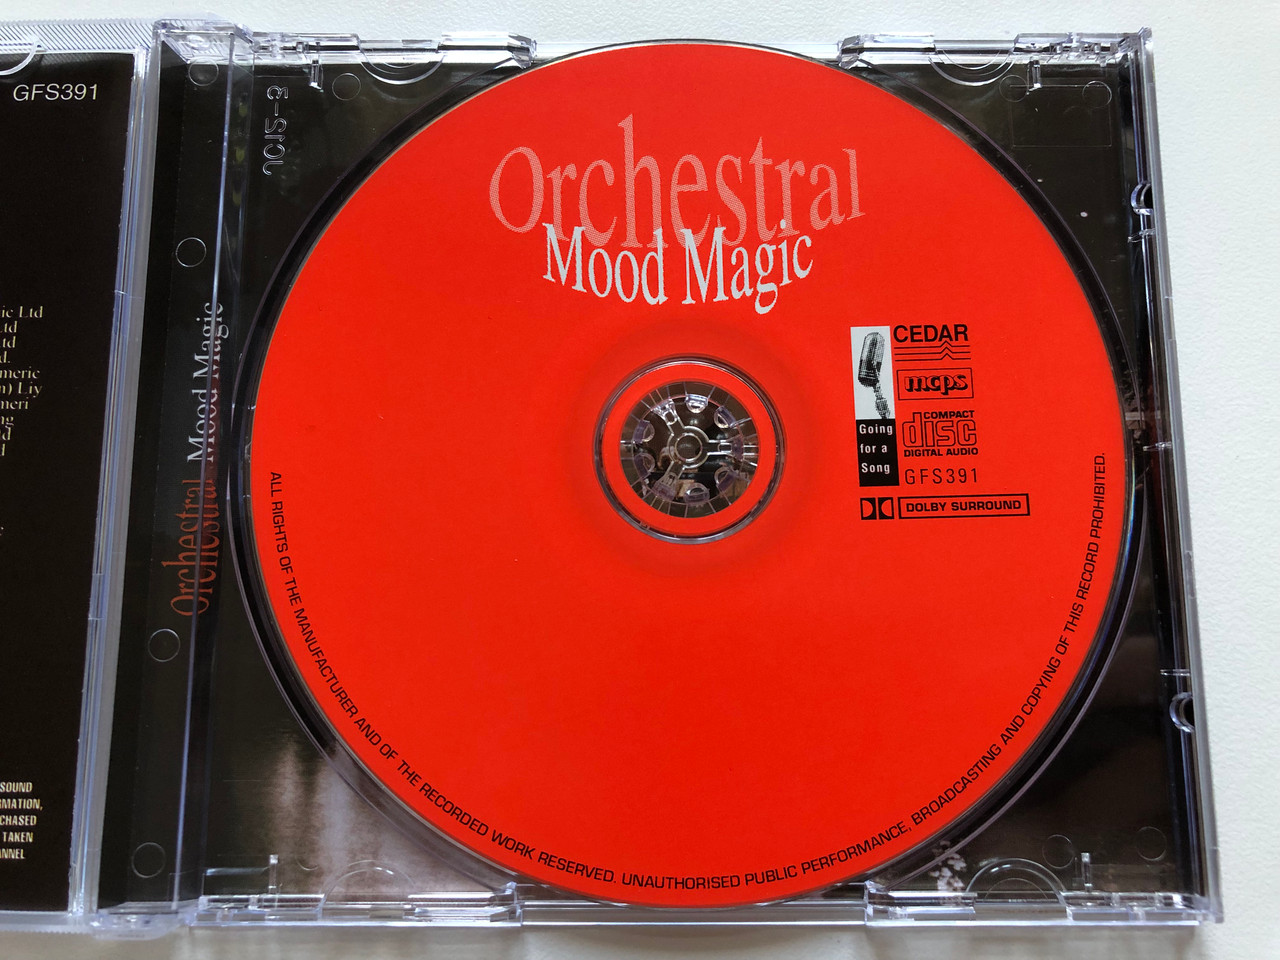 https://cdn10.bigcommerce.com/s-62bdpkt7pb/products/0/images/211084/London_Symphony_Orchestra_Orchestral_Mood_Magic_20_all-time_favourites_especially_arranged_for_orchestra_-_Nights_In_White_Satin_Lately_Shes_Out_Of_My_Life_50_Ways_To_Leave_Your_Lov_3__09026.1643796021.1280.1280.JPG?c=2&_gl=1*1g03v9v*_ga*MjA2NTIxMjE2MC4xNTkwNTEyNTMy*_ga_WS2VZYPC6G*MTY0Mzc4MTAzOS4yODIuMS4xNjQzNzk1NjA0LjU3